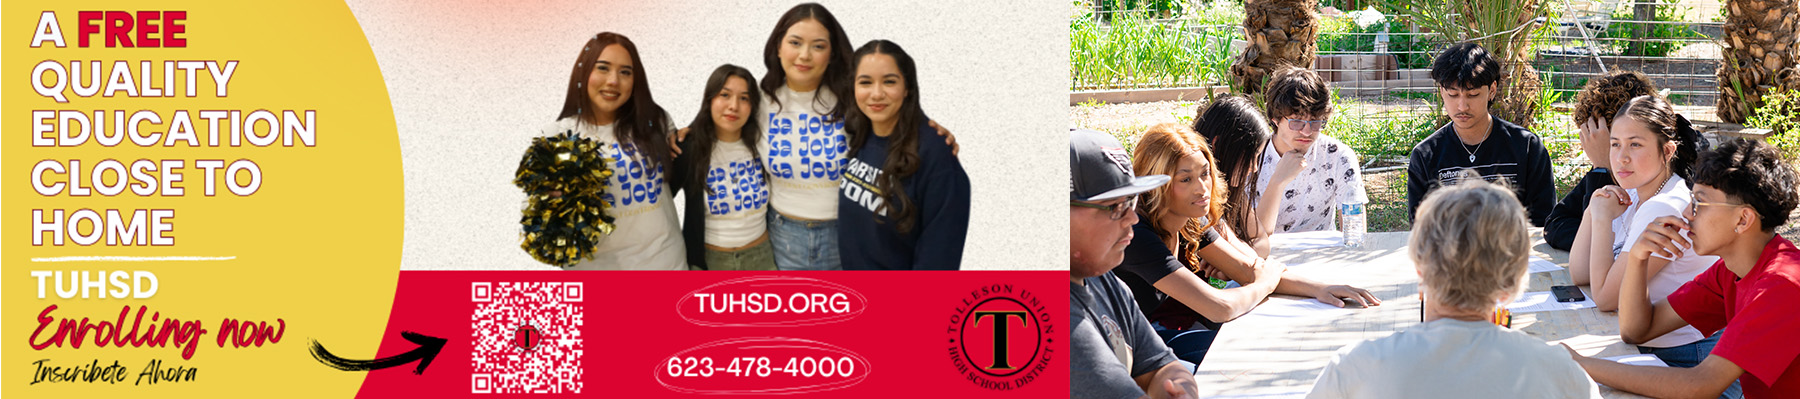 A free quality education close to home - TUHSD Enrolling now | Inscribete Ahora - tuhsd.org - 623-478-4000 | Group of students sitting around an outside table